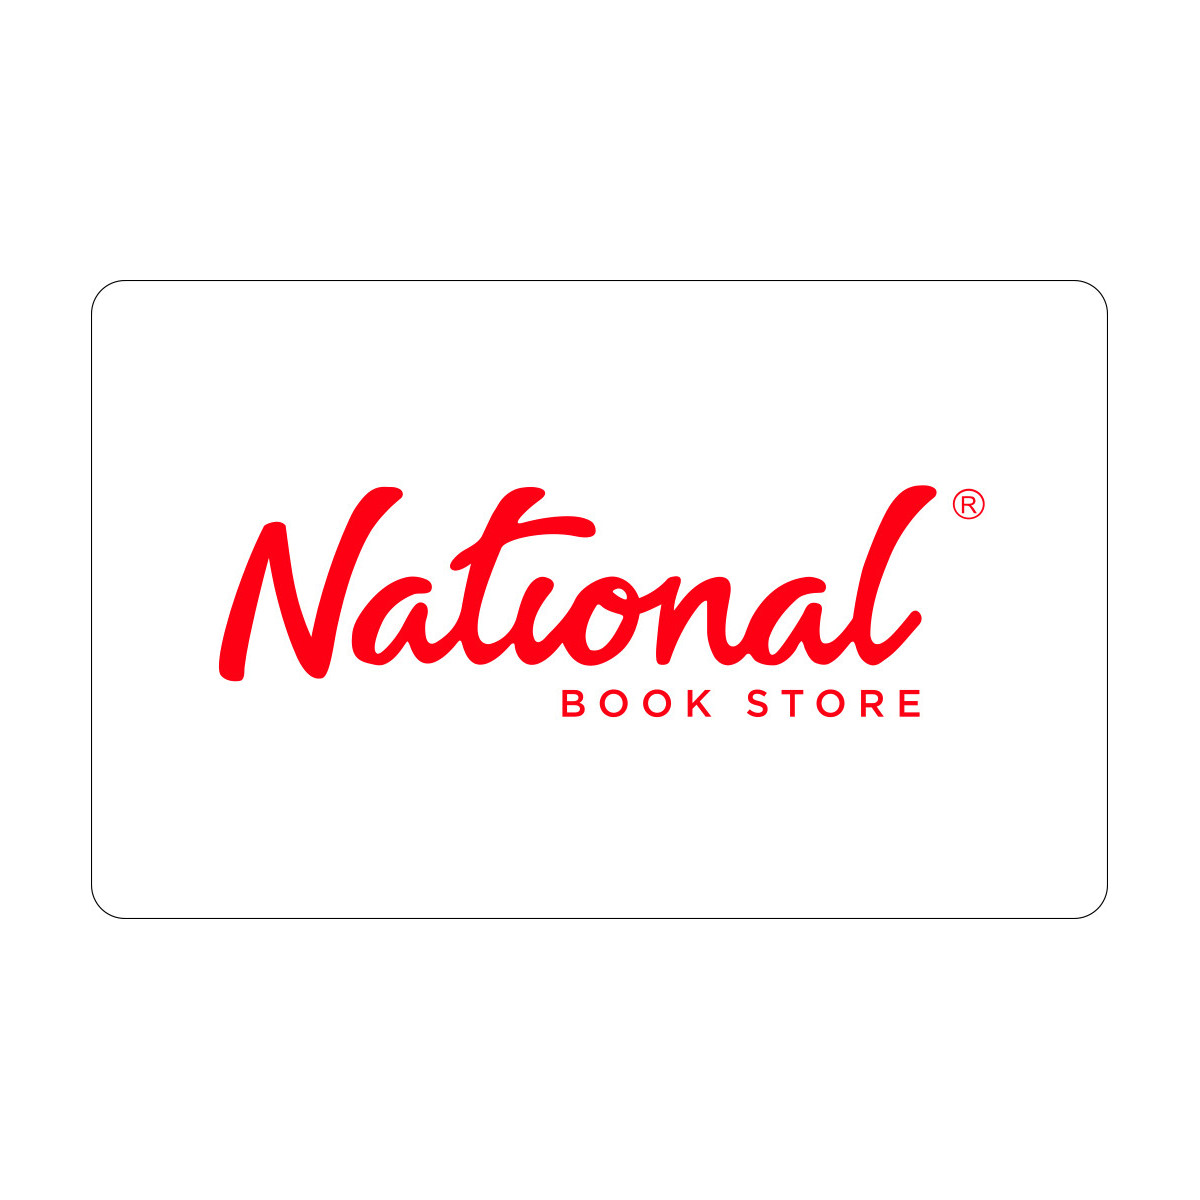 NBS GIFT CARD P300 (VALID FOR IN-STORE PURCHASE) - LOGO DESIGN